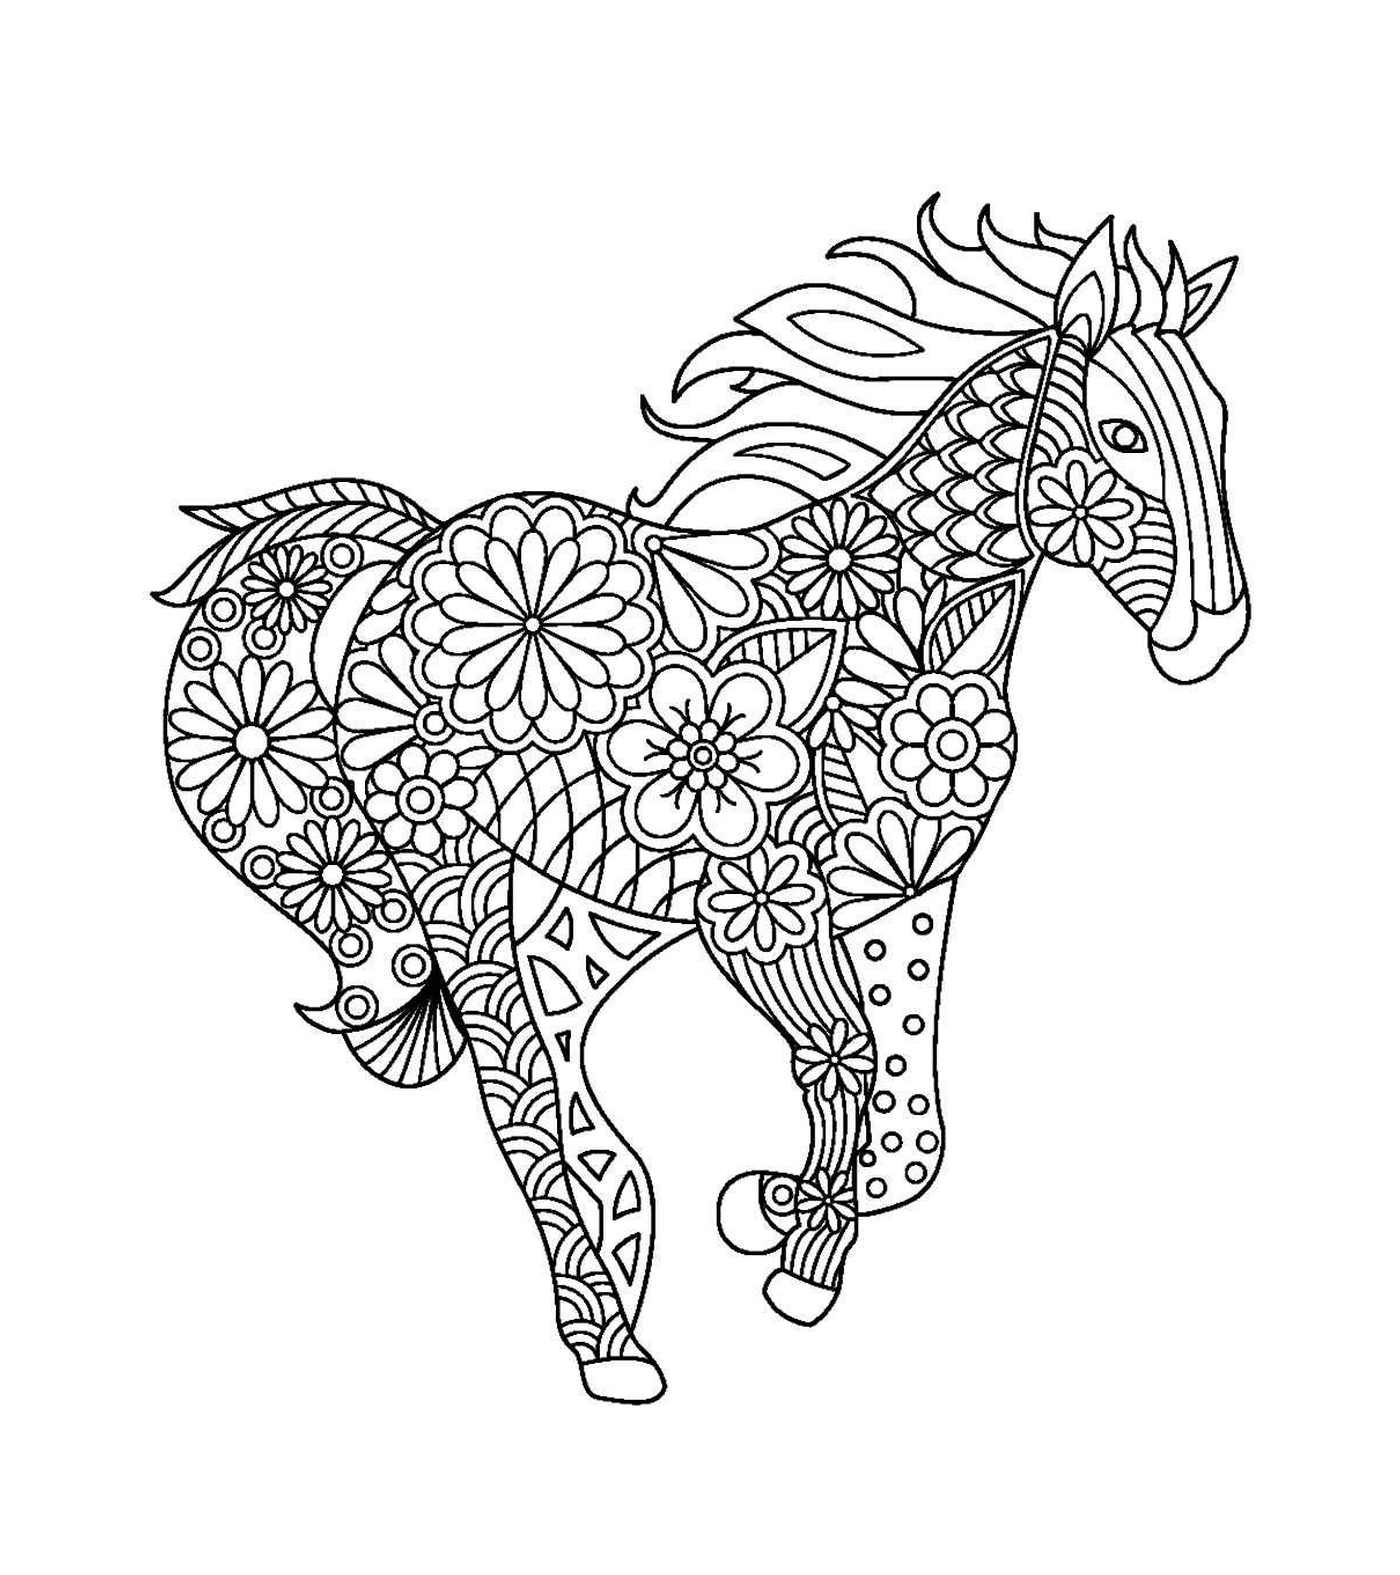  An adult of a horse with floral designs 